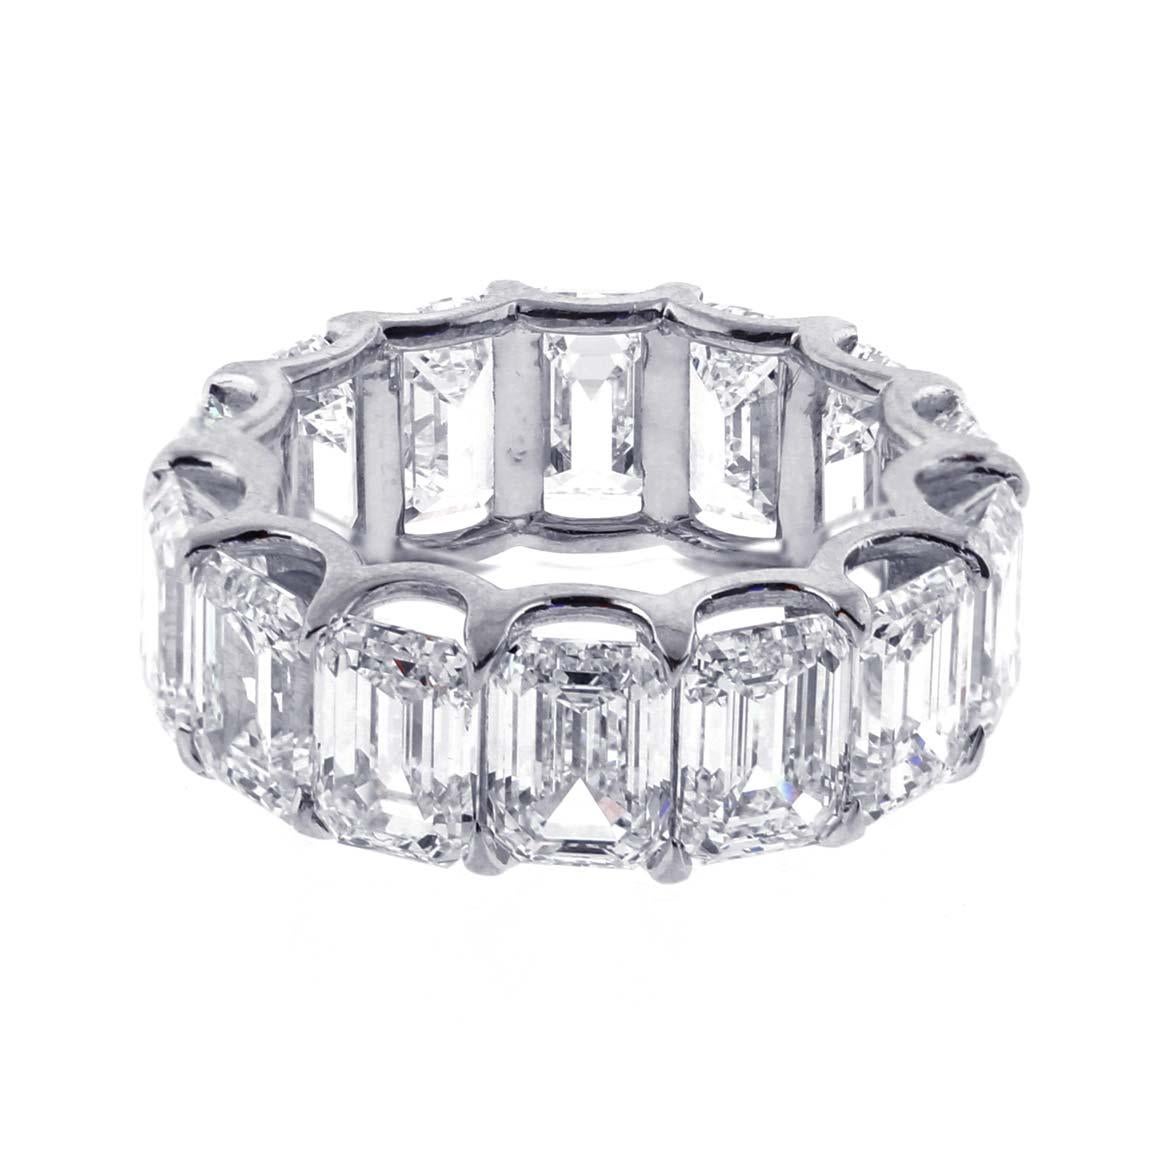 A full circle of emerald cut diamonds set in a shared  U prong platinum setting. Each diamond is G.I.A certified precisely matched for equal brilliants and fire.

♦ Metal: Platinum
♦ 14 Diamond=14.27
♦ H color, VS2+ Clarity
♦ Size 6
♦ A Pampillonia